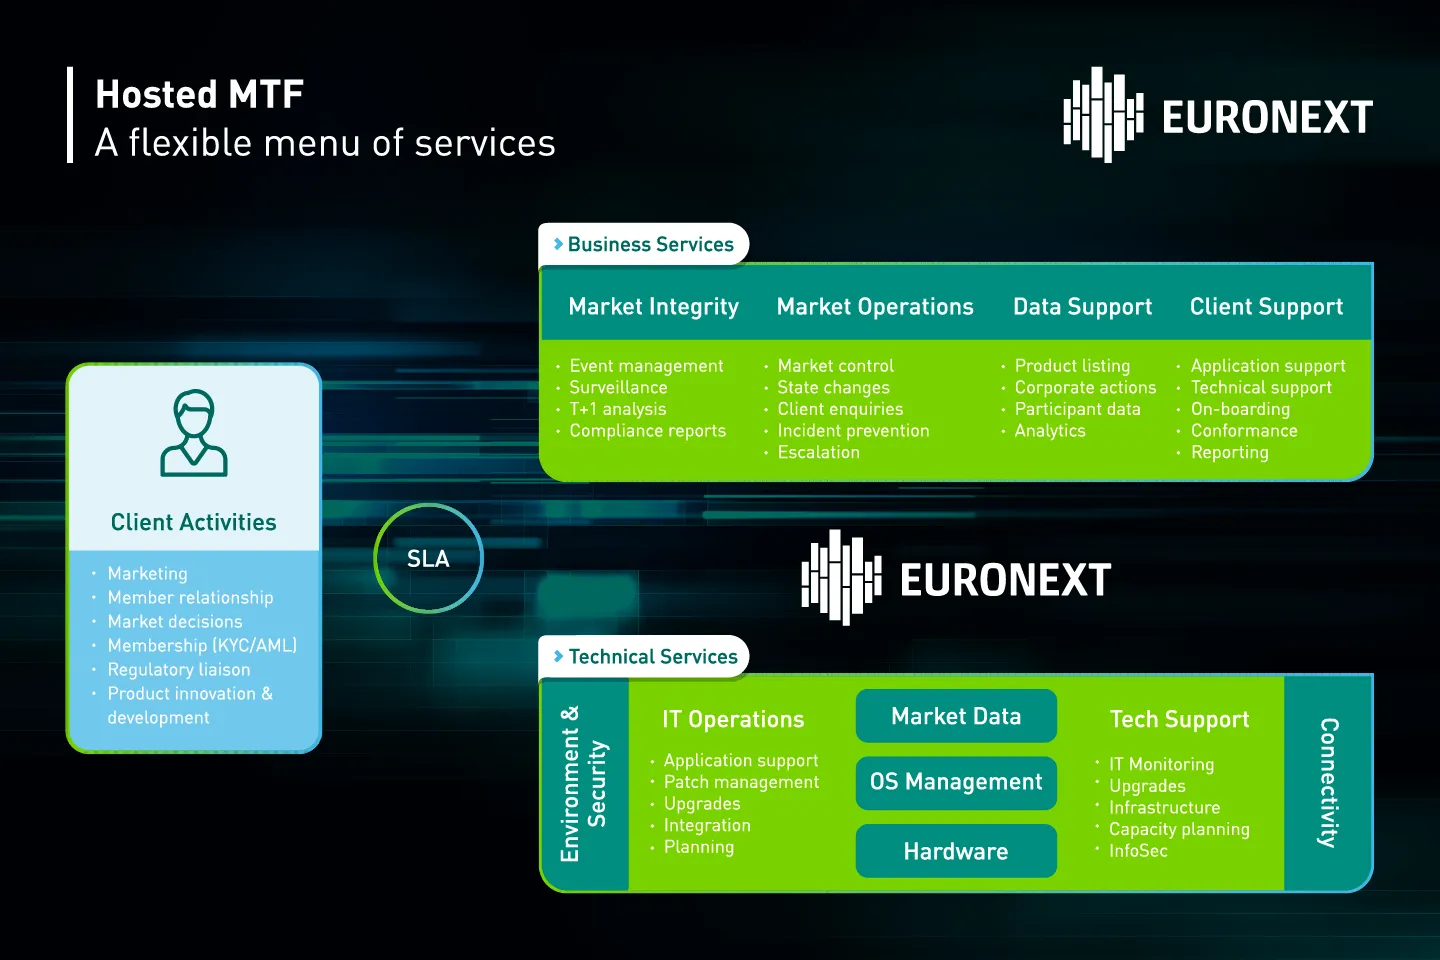 Euronext’s hosted MTF service